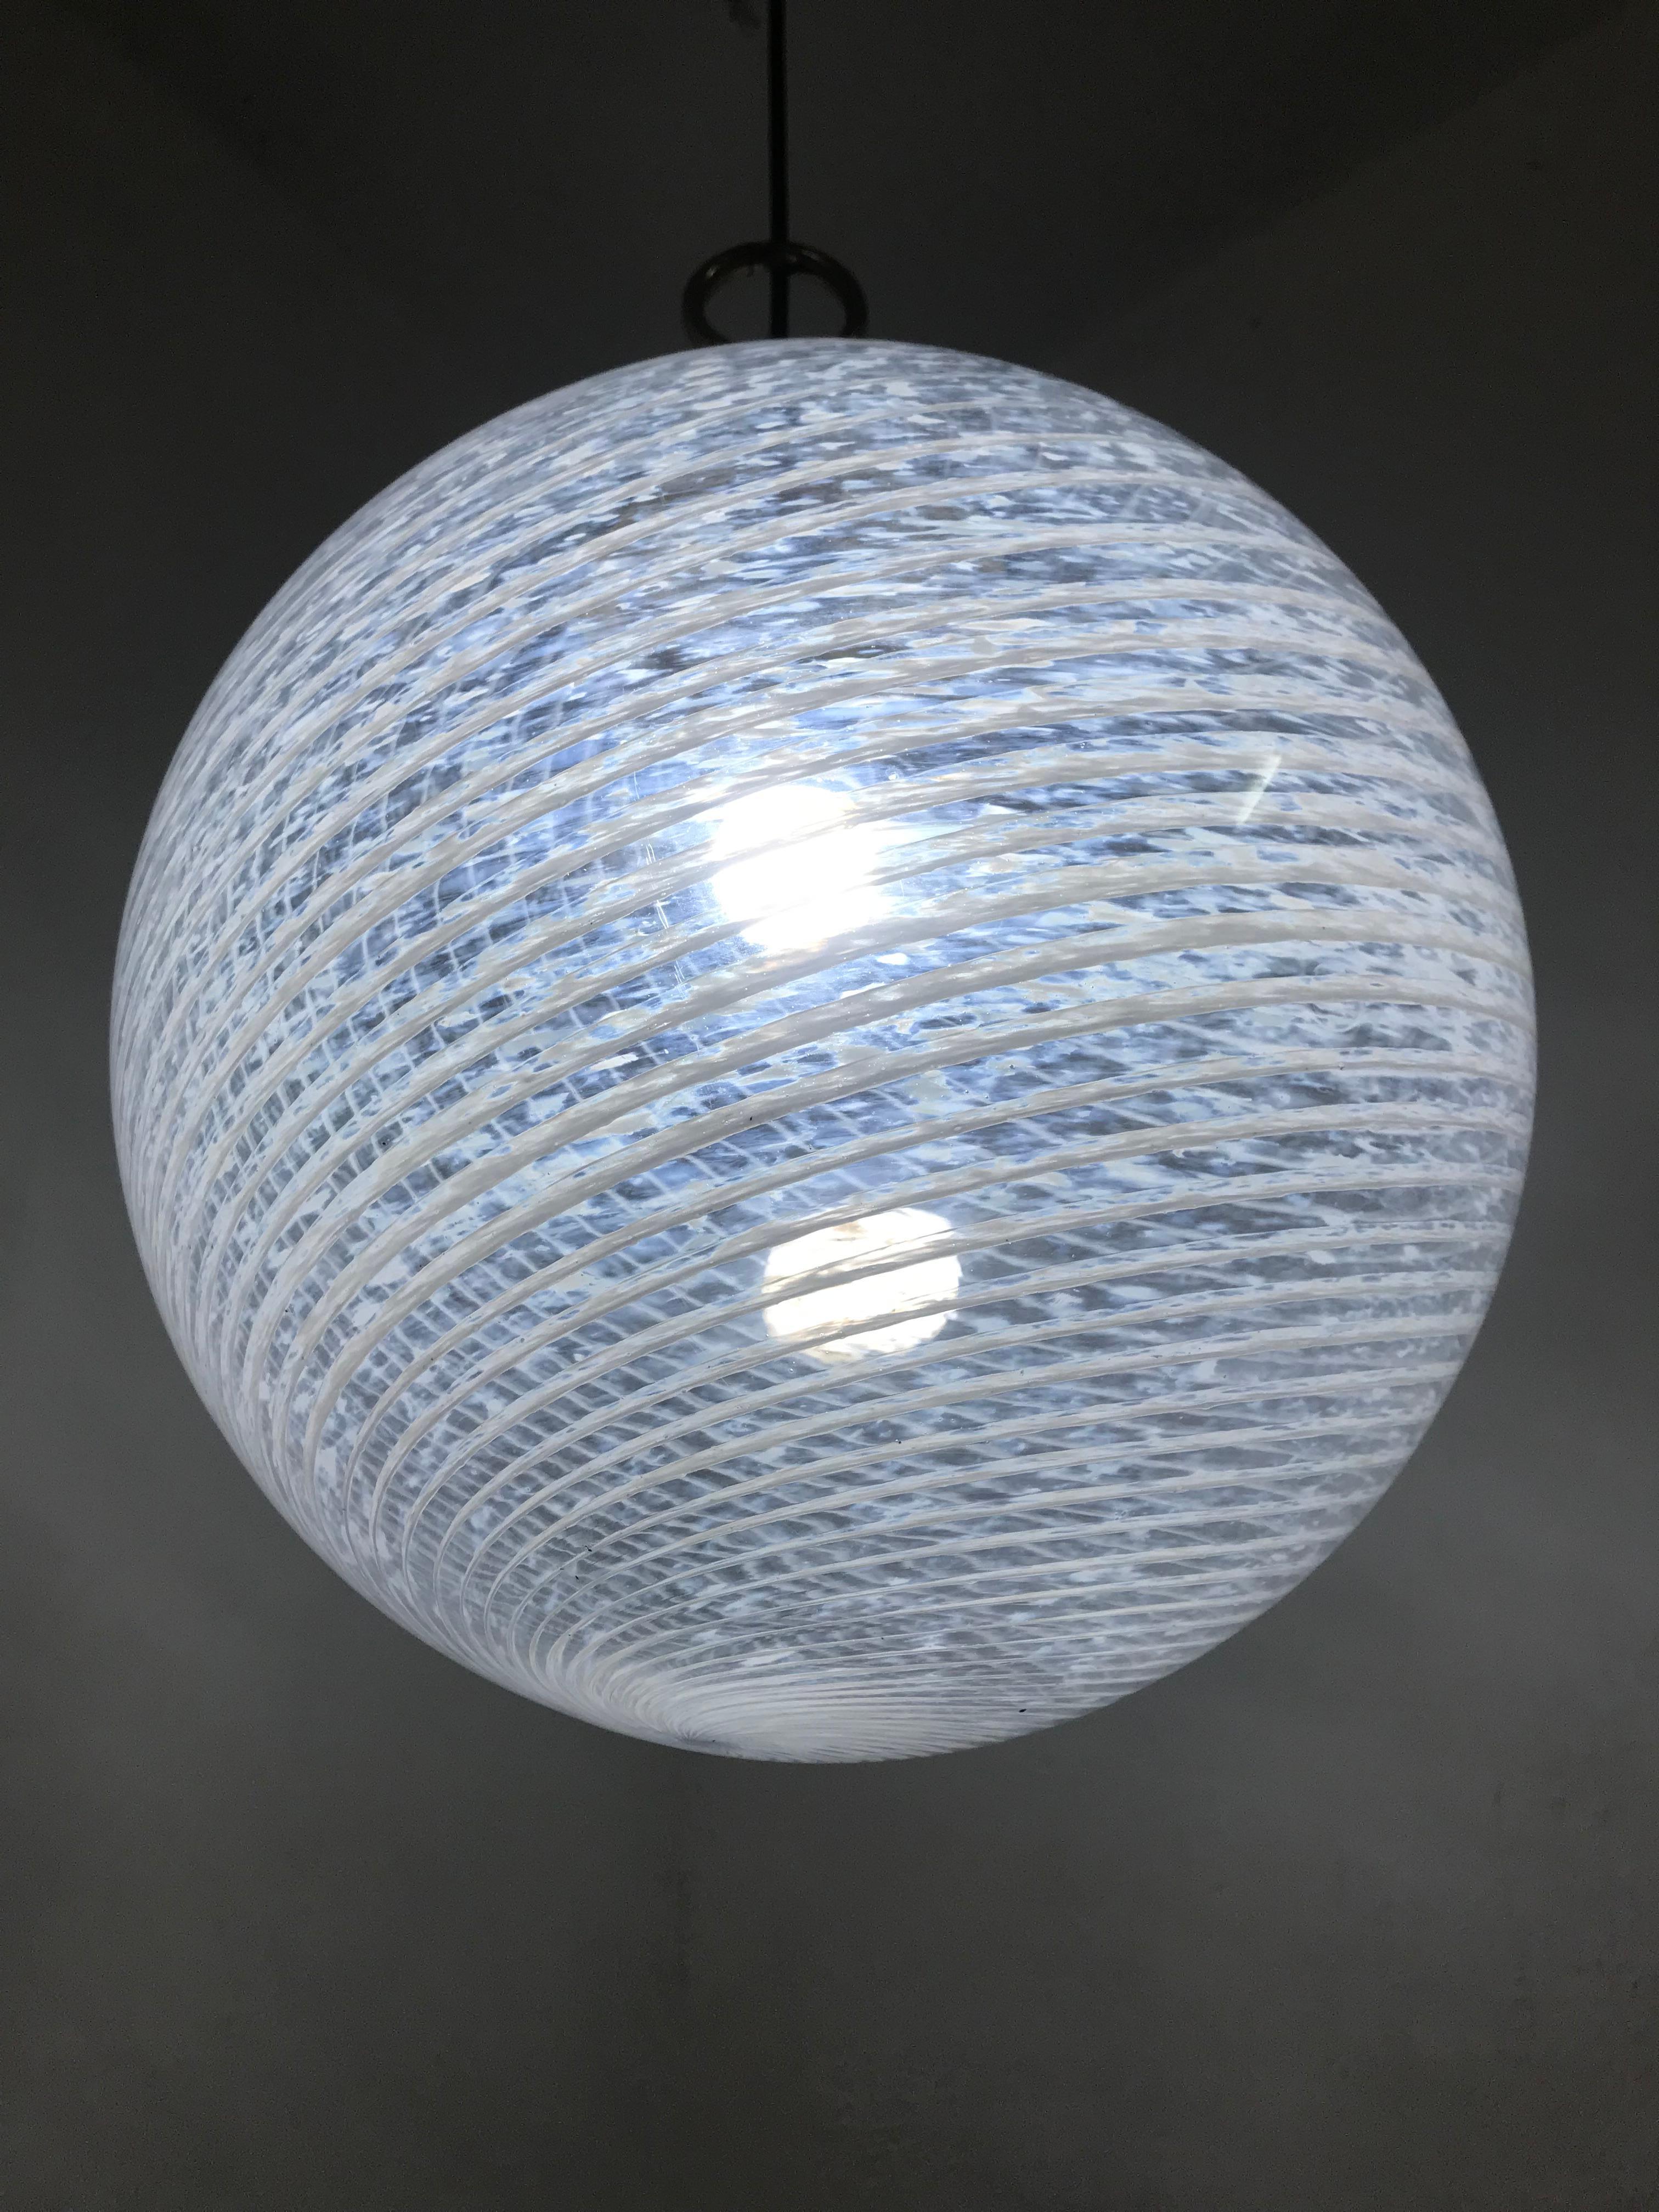 Italian Mid-Century Modern Light by Venini in striped and marbled Murano Glass, 1970s